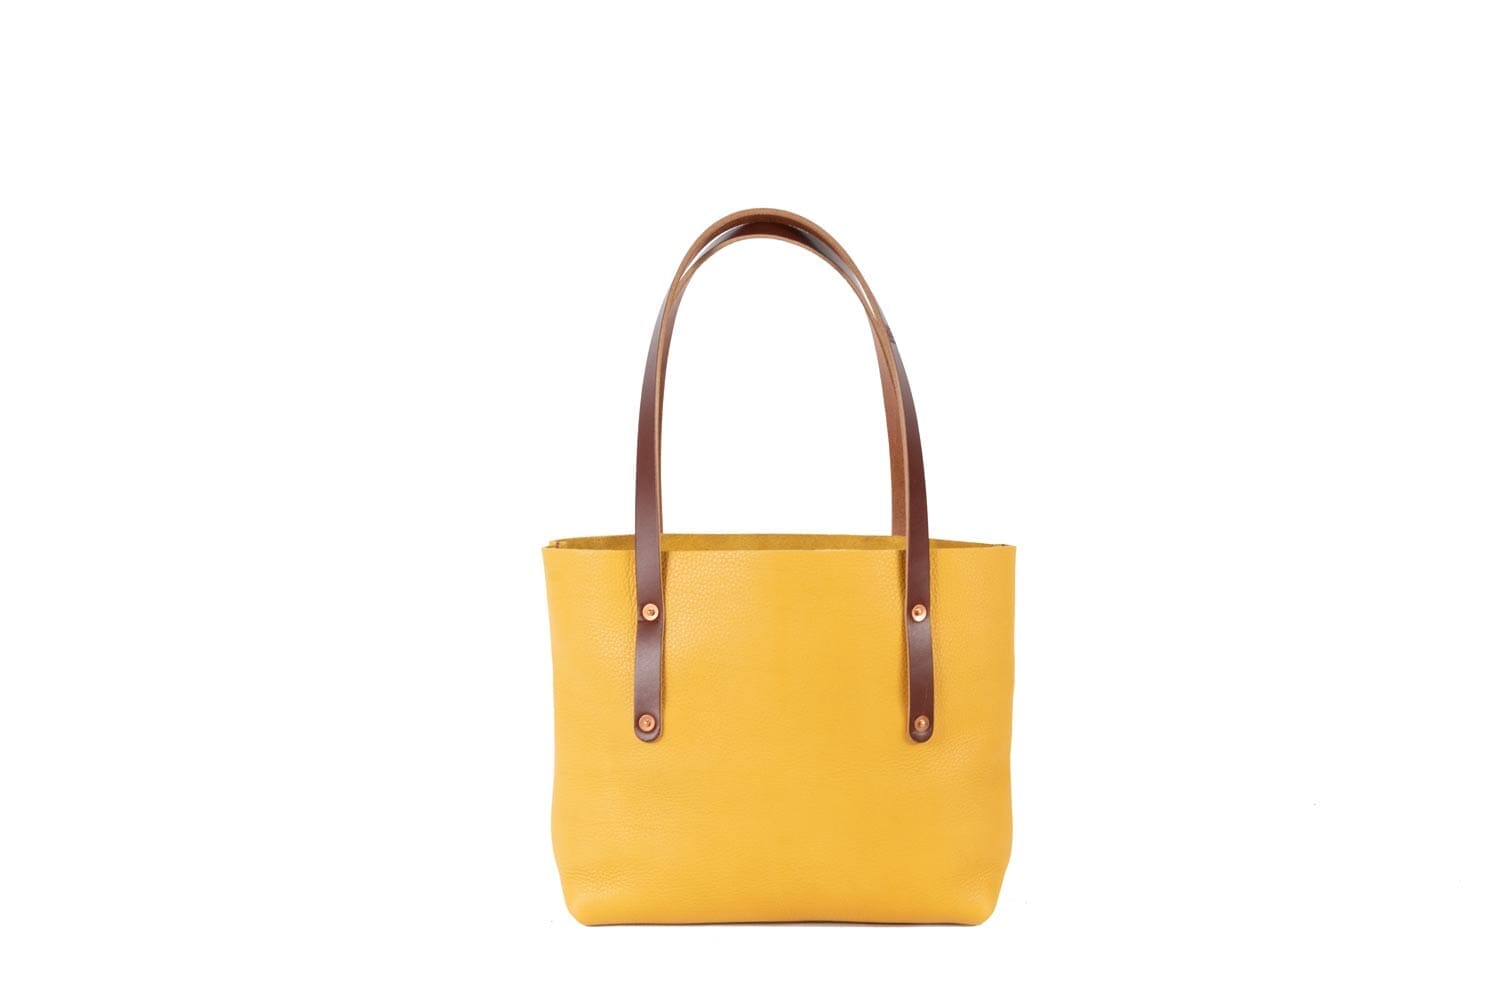 AVERY LEATHER TOTE BAG - SMALL - GOLDEN SUN (RTS)